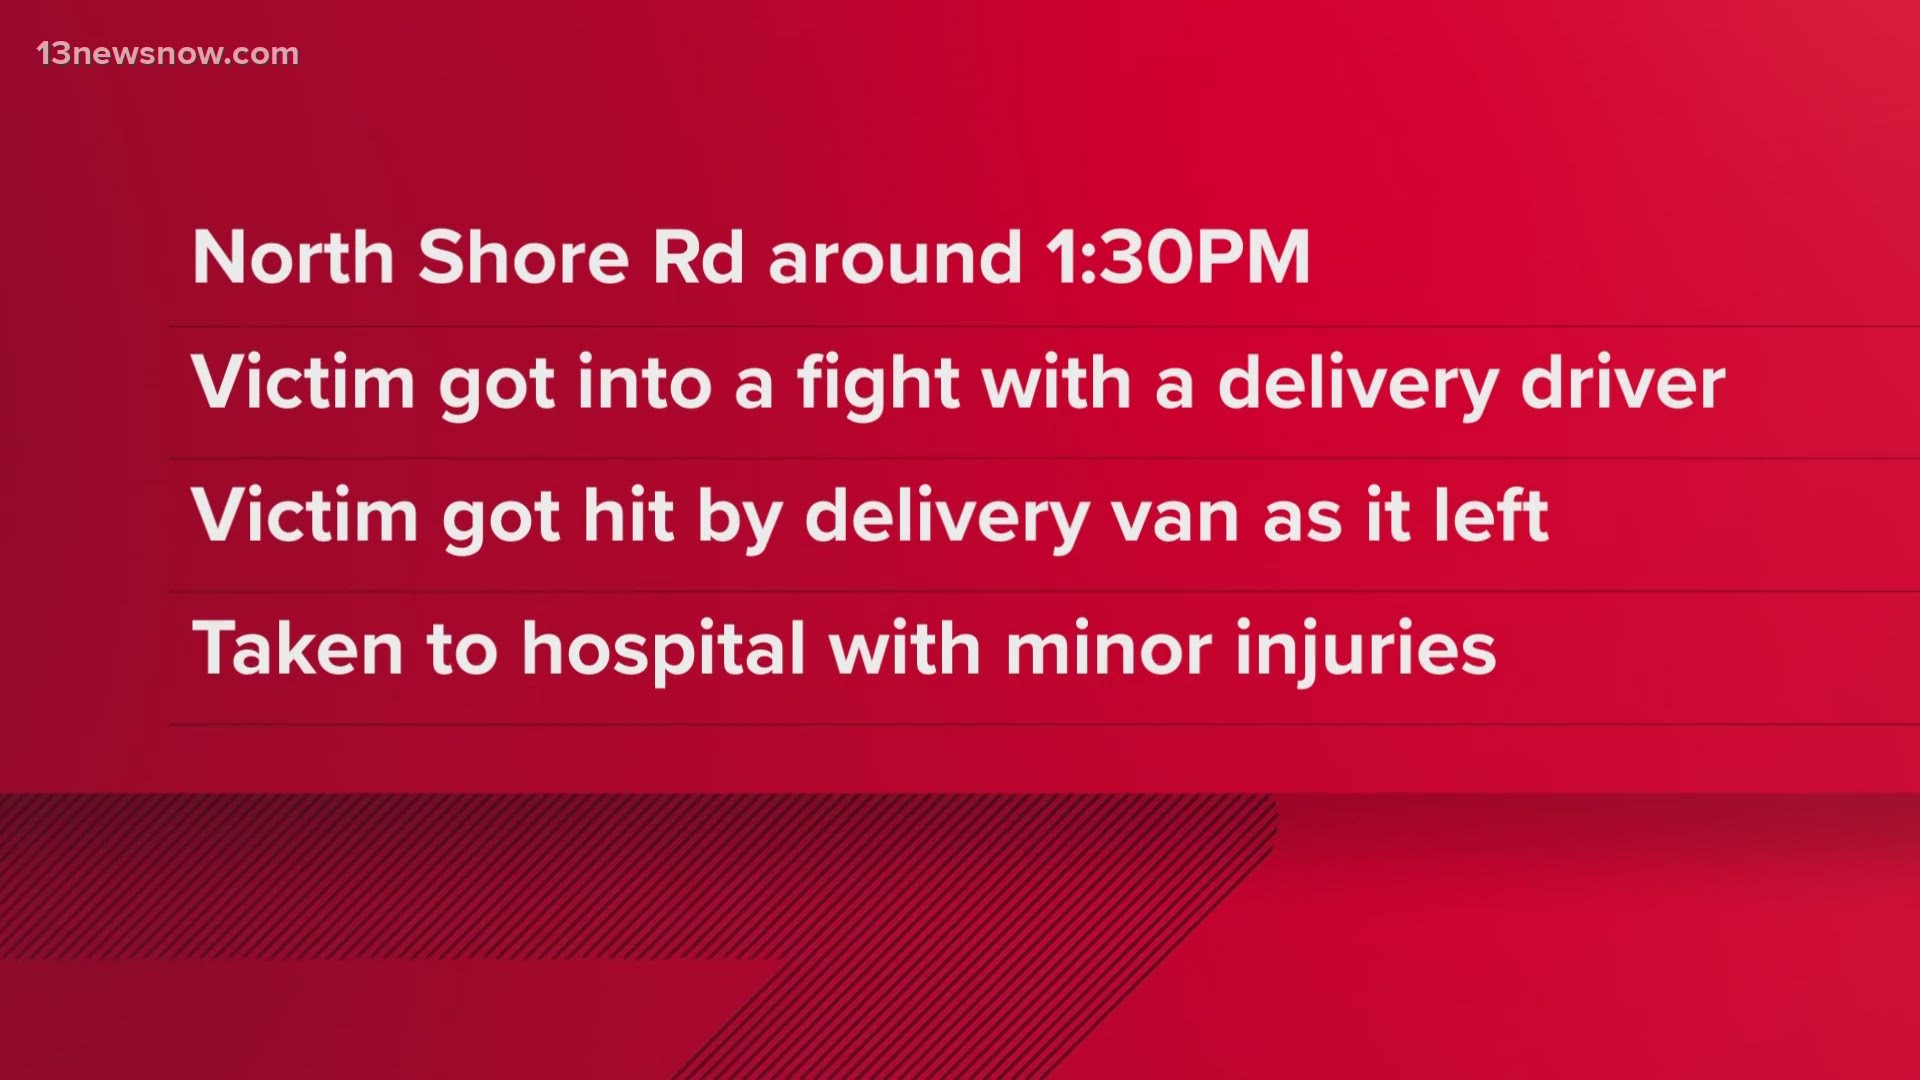 Officers say it happened on North Shore Road around 1:30 p.m. Monday.